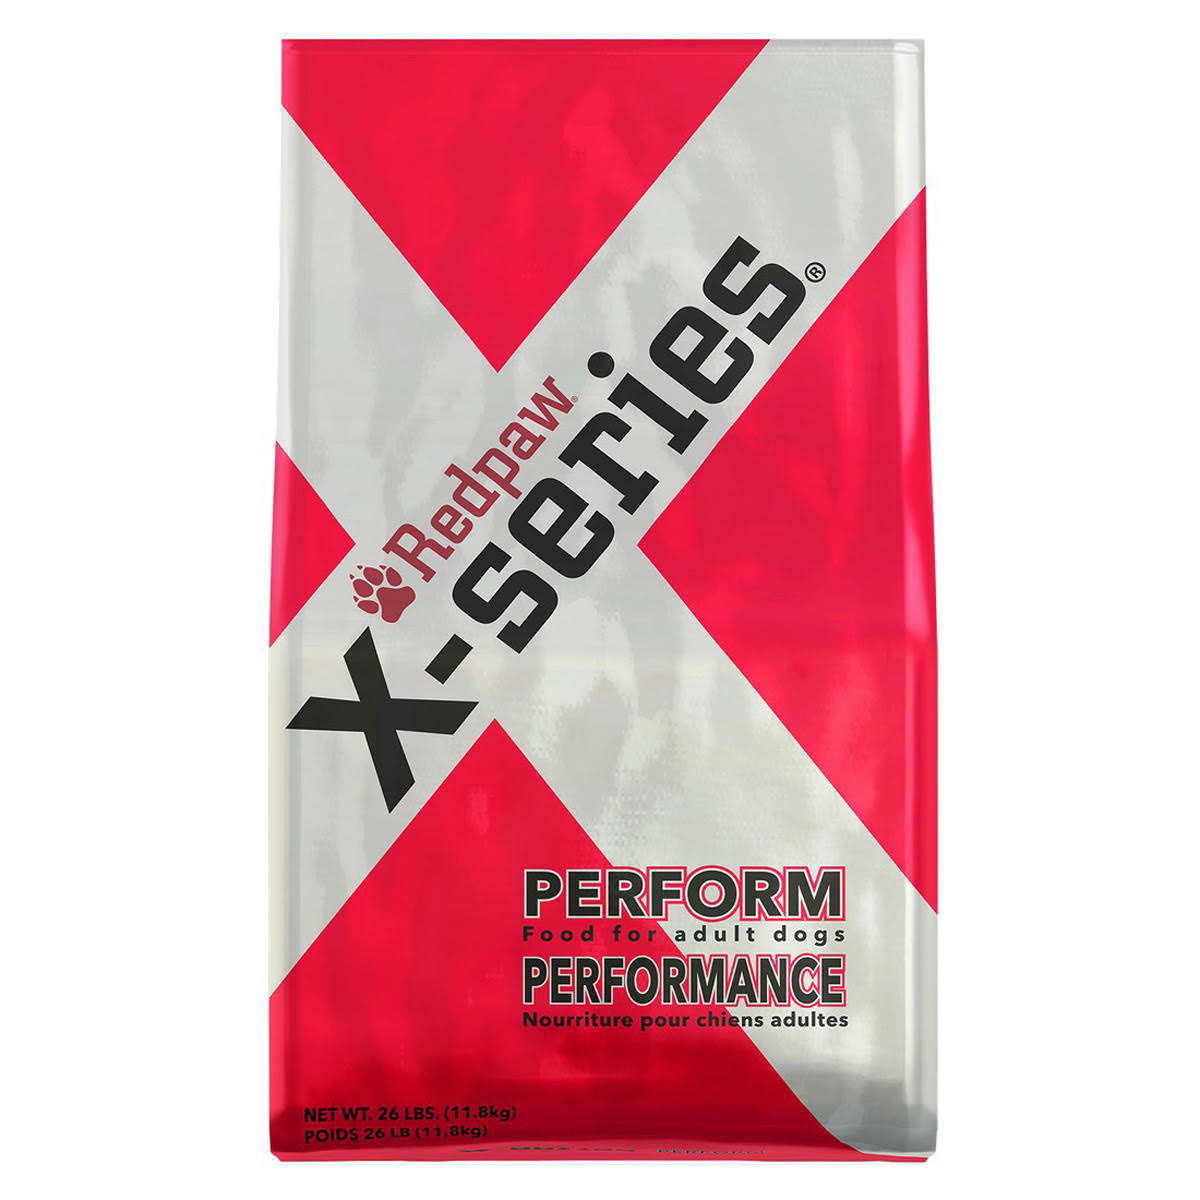 Redpaw X-Series Perform 3 Dog Food for Canine Fitness - 26lb